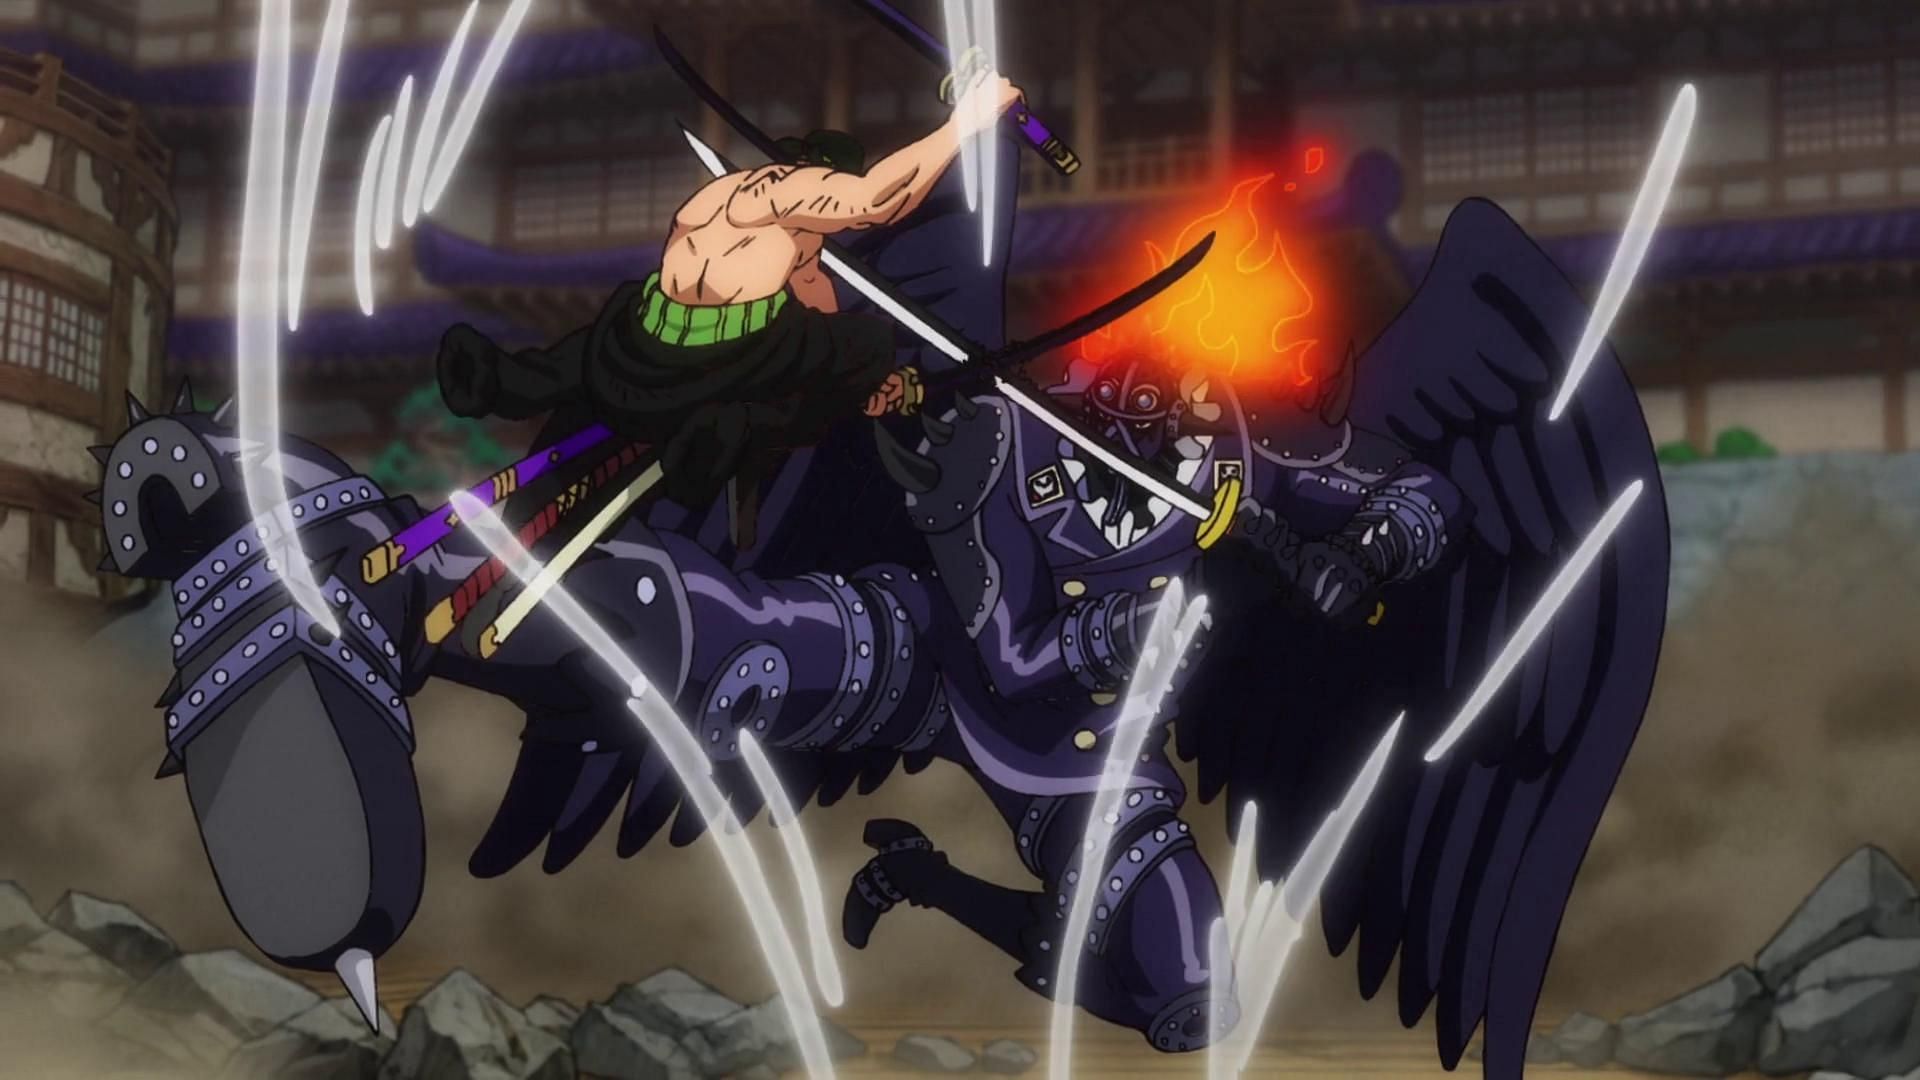 King vs Zoro as seen in the One Piece anime (Image via Toei Animation, One Piece)